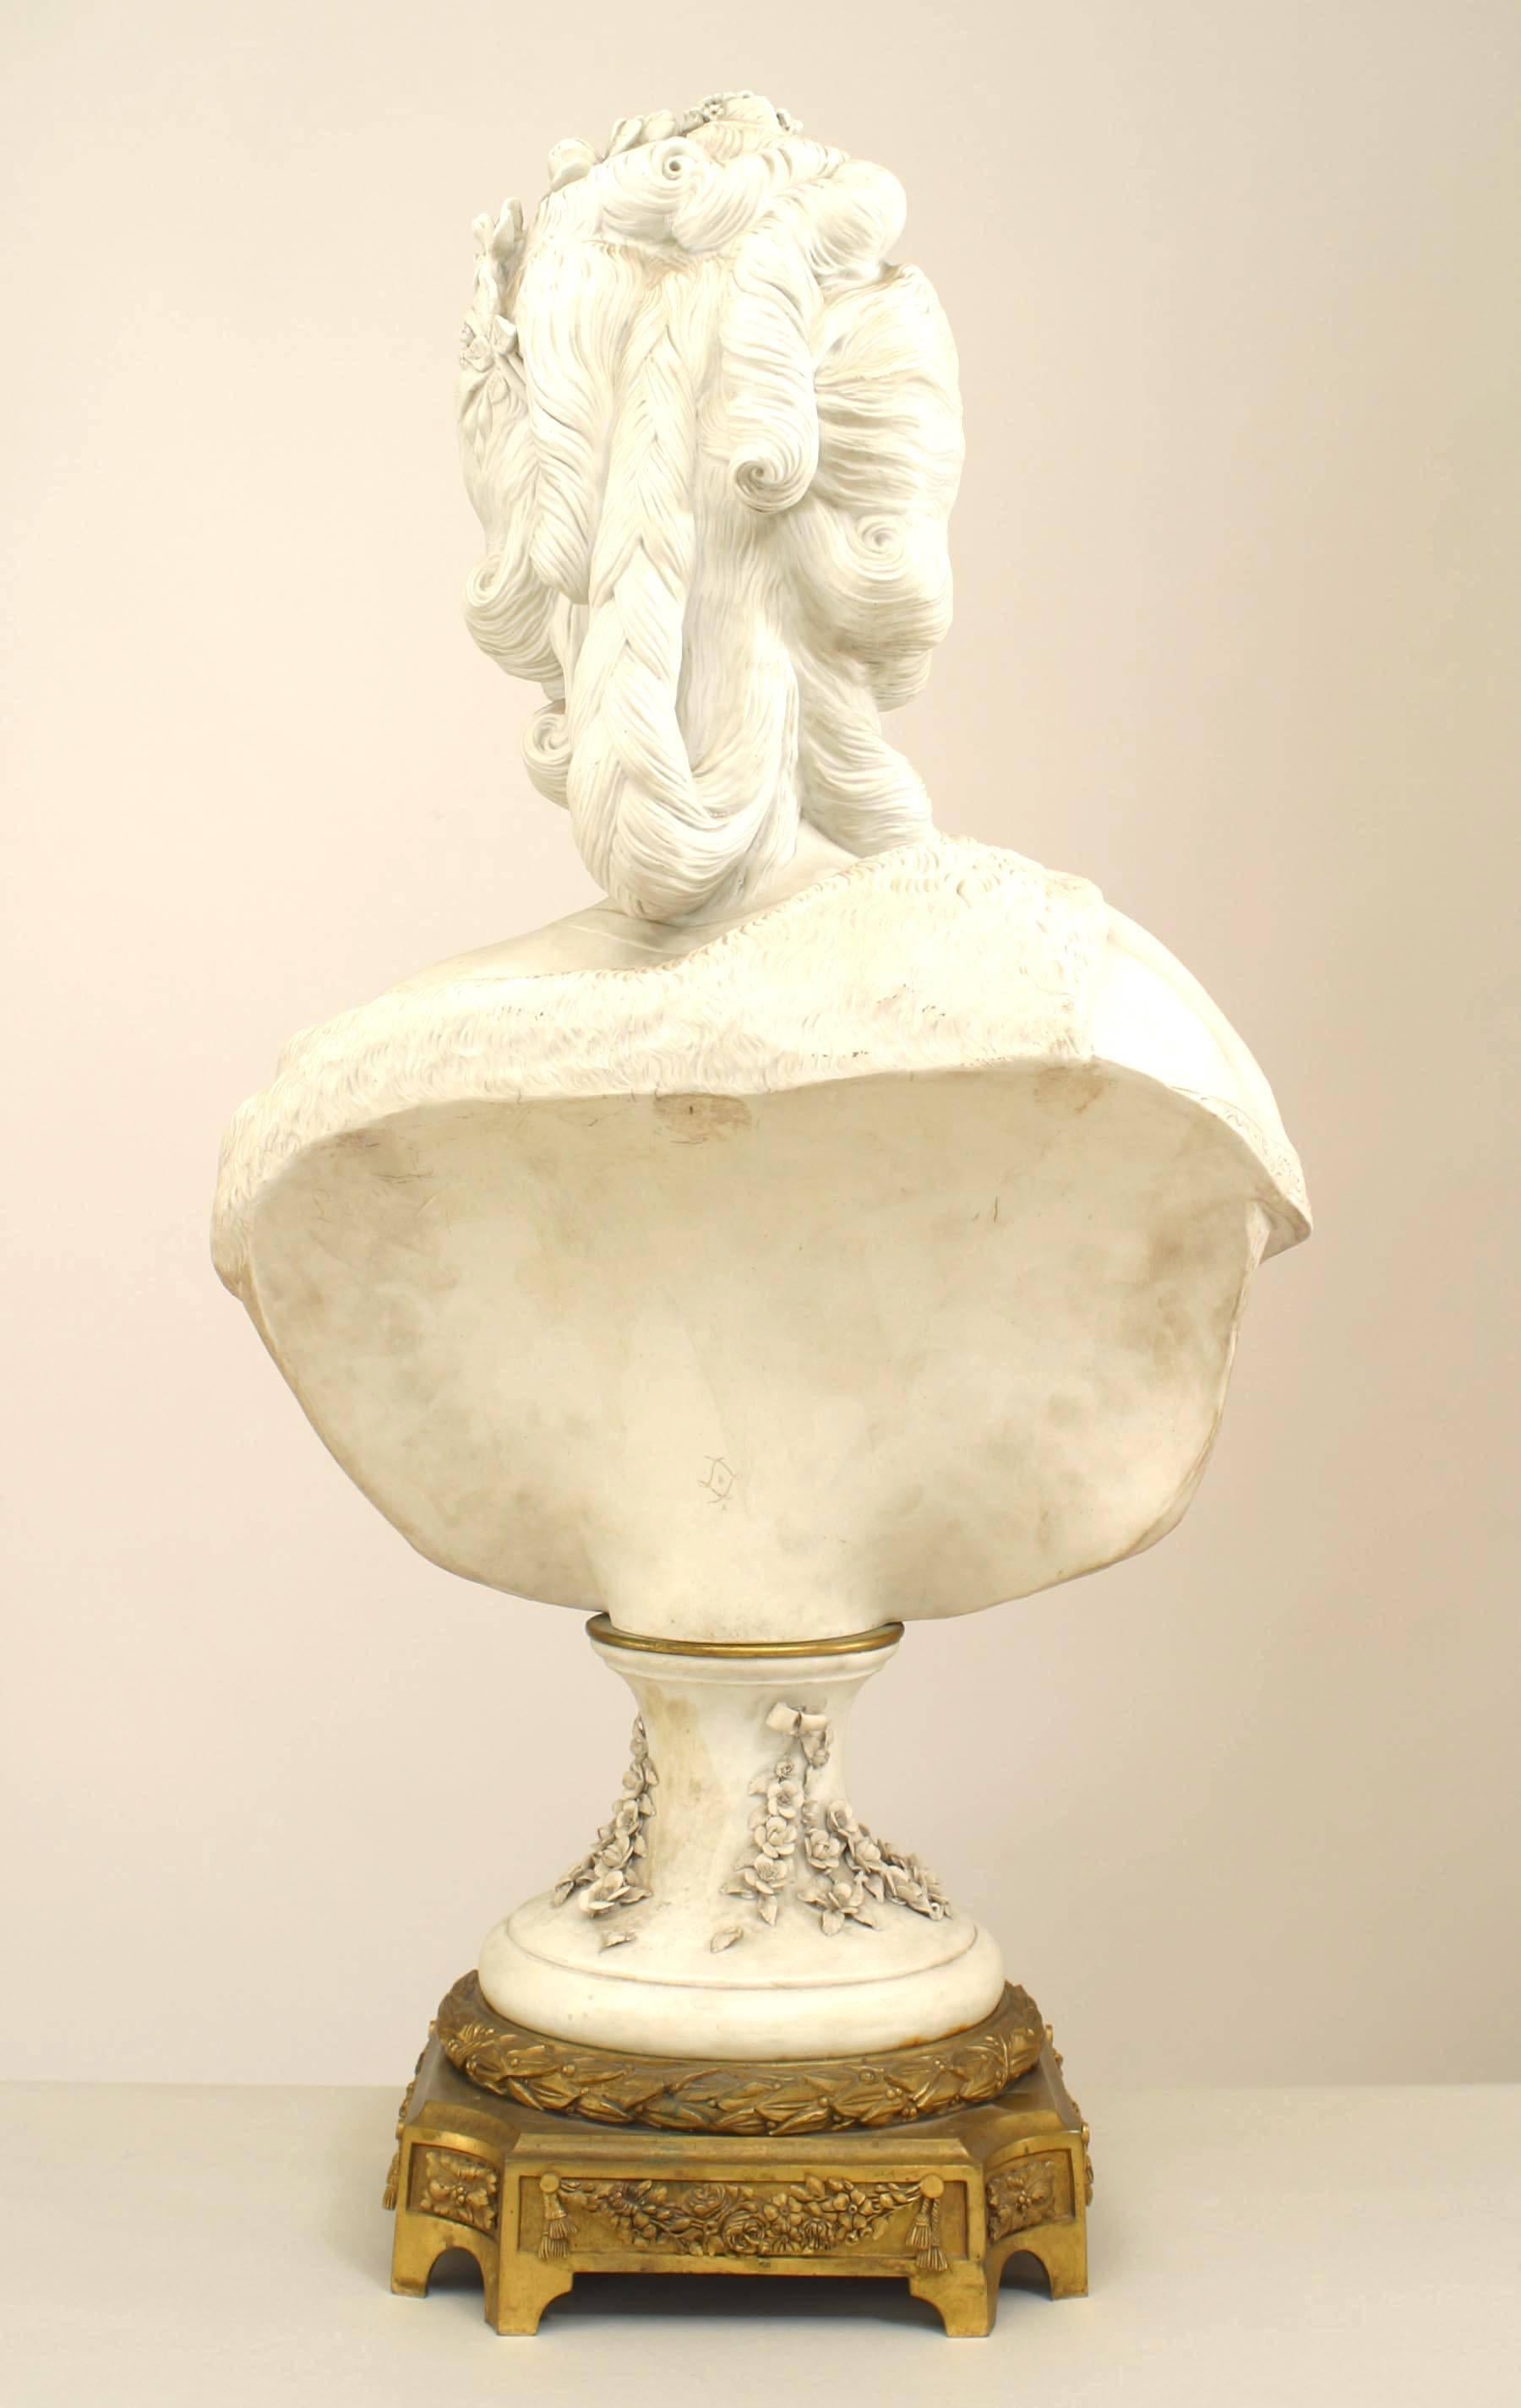 French Louis XVI style (19th Cent) parium bust of Marie Antoinette wearing a robe and mounted on a festooned pedestal and resting on a bronze base (signed with Sevre mark)
